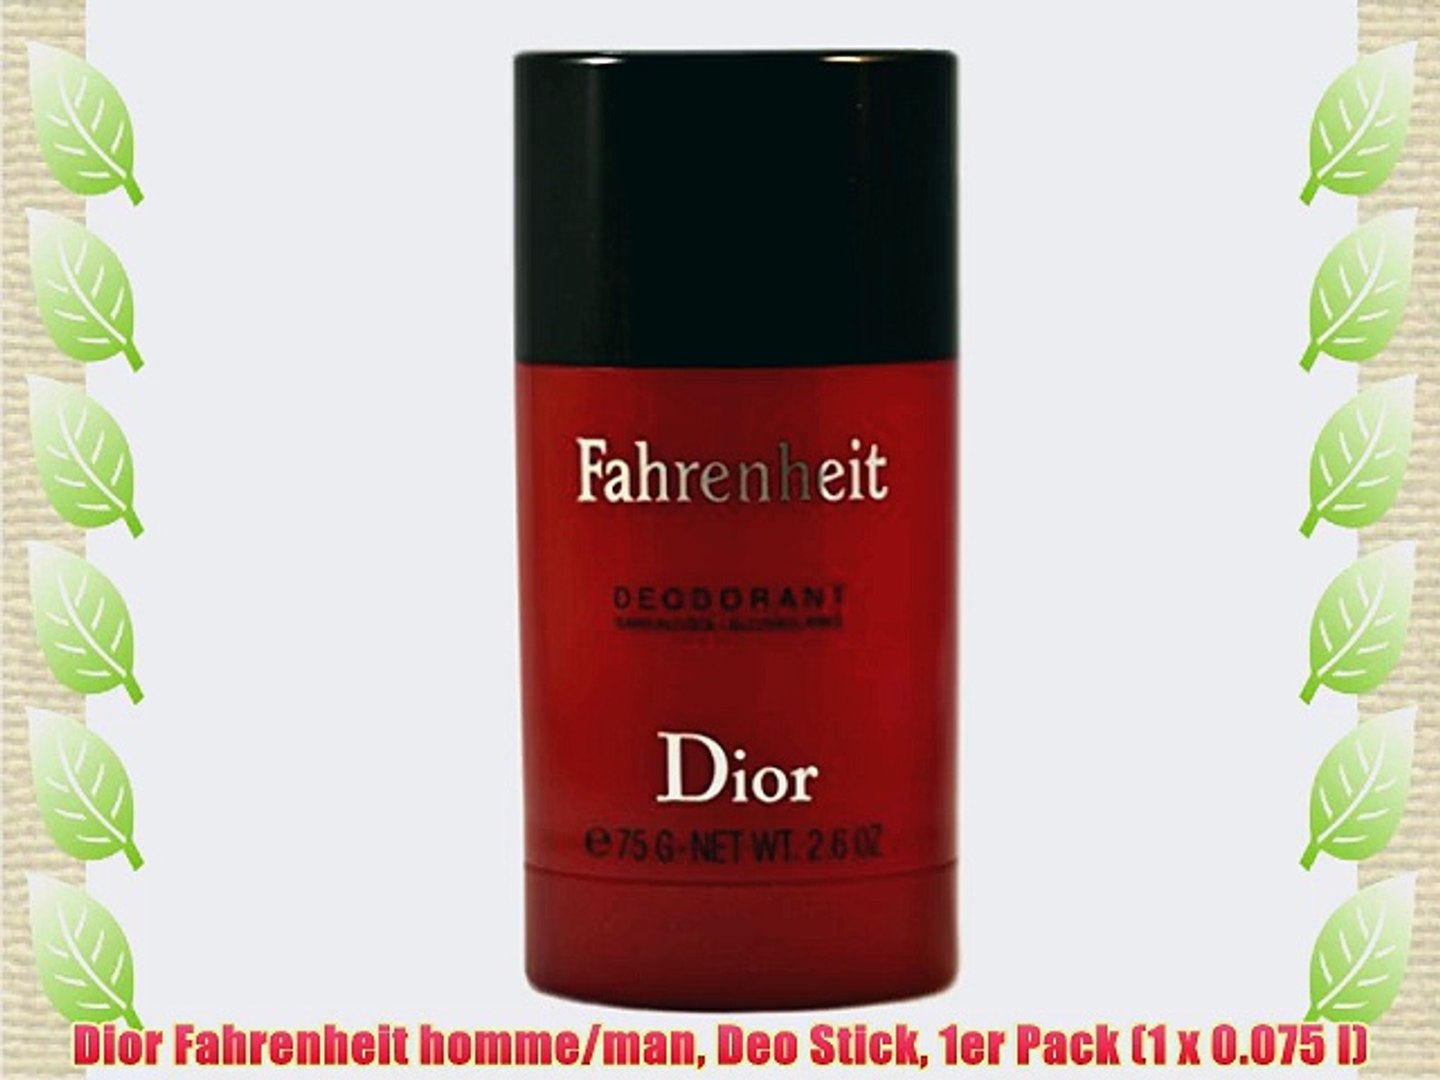 Dior Fahrenheit homme/man Deo Stick 1er Pack (1 x 0.075 l) - video  Dailymotion